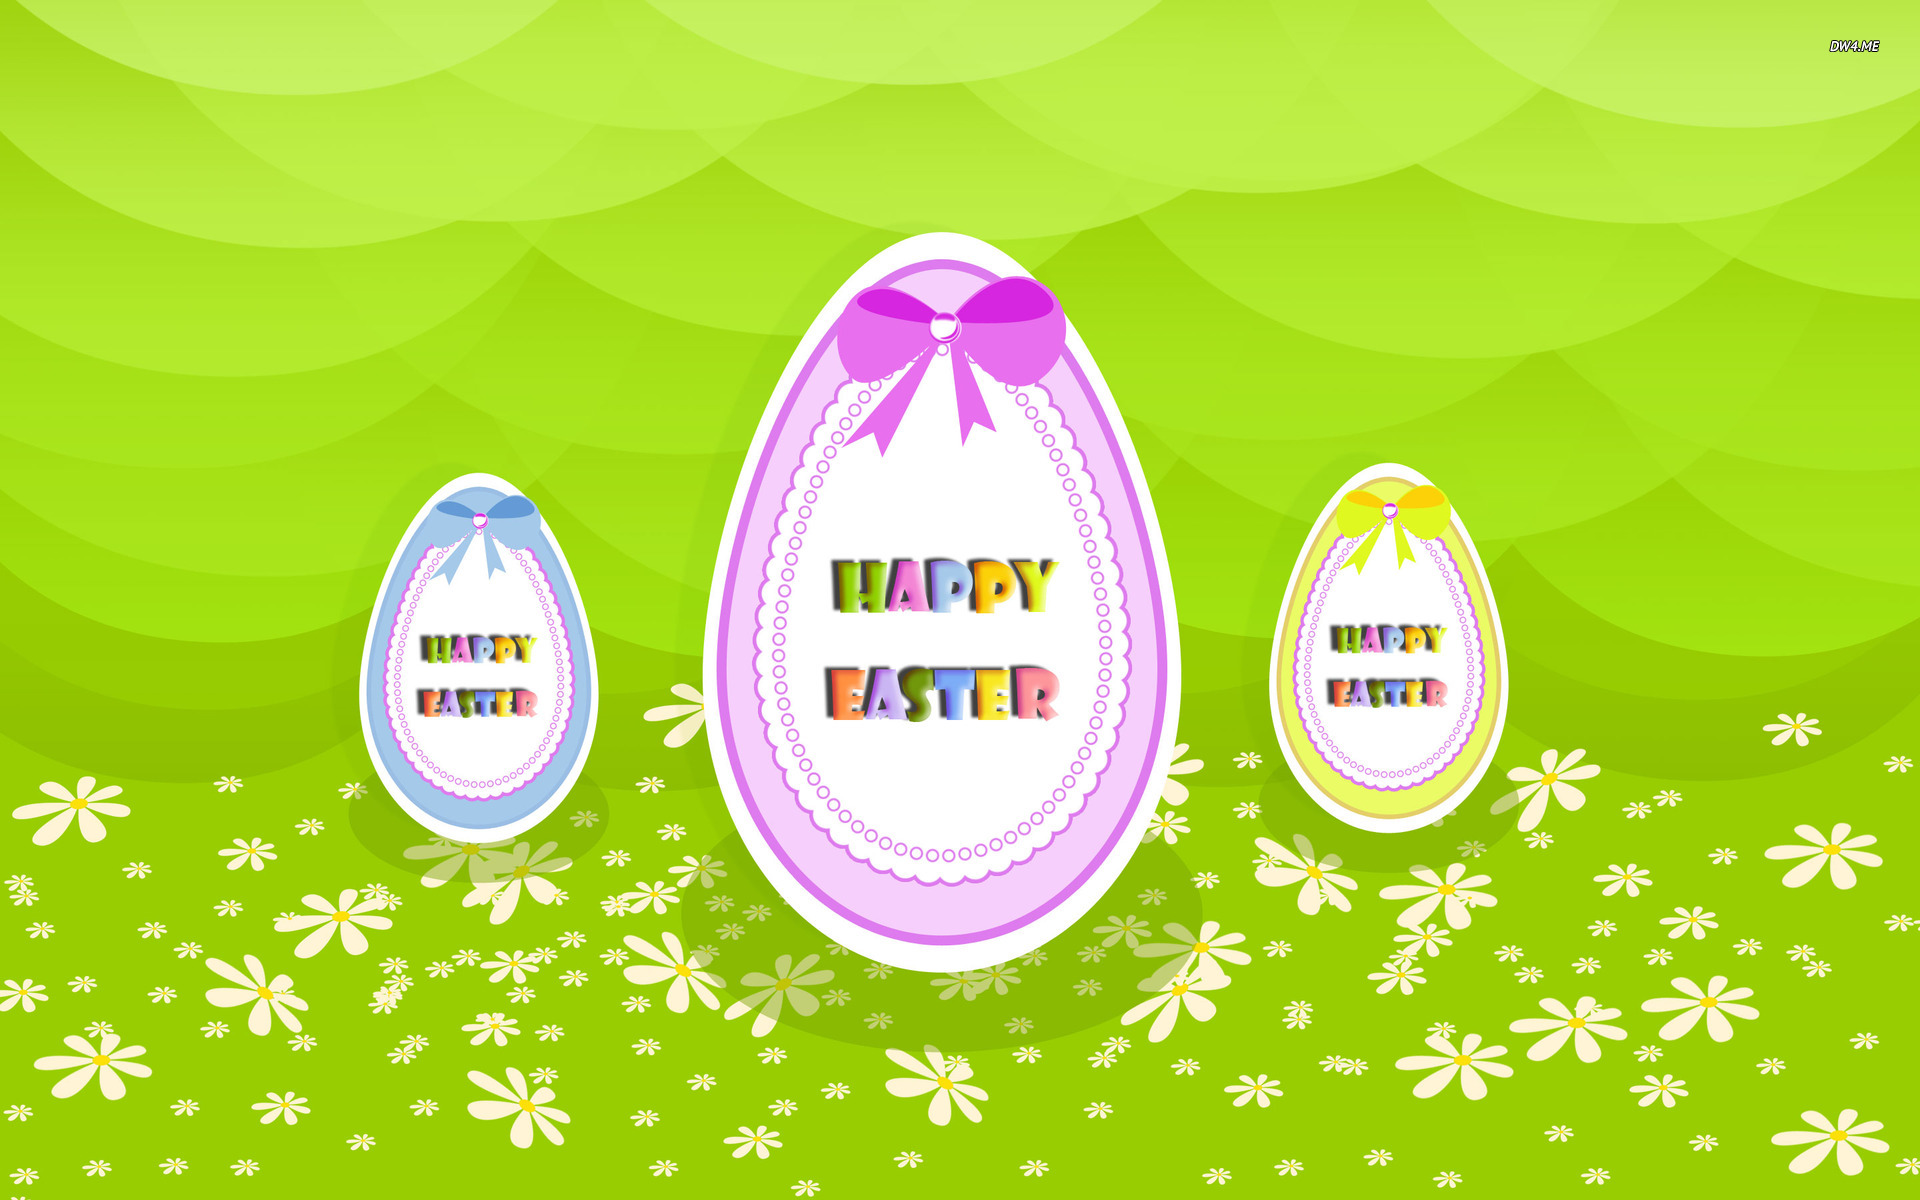 Happy Easter Day 2013 Background Hd Wallpaper Happy - Illustration - HD Wallpaper 